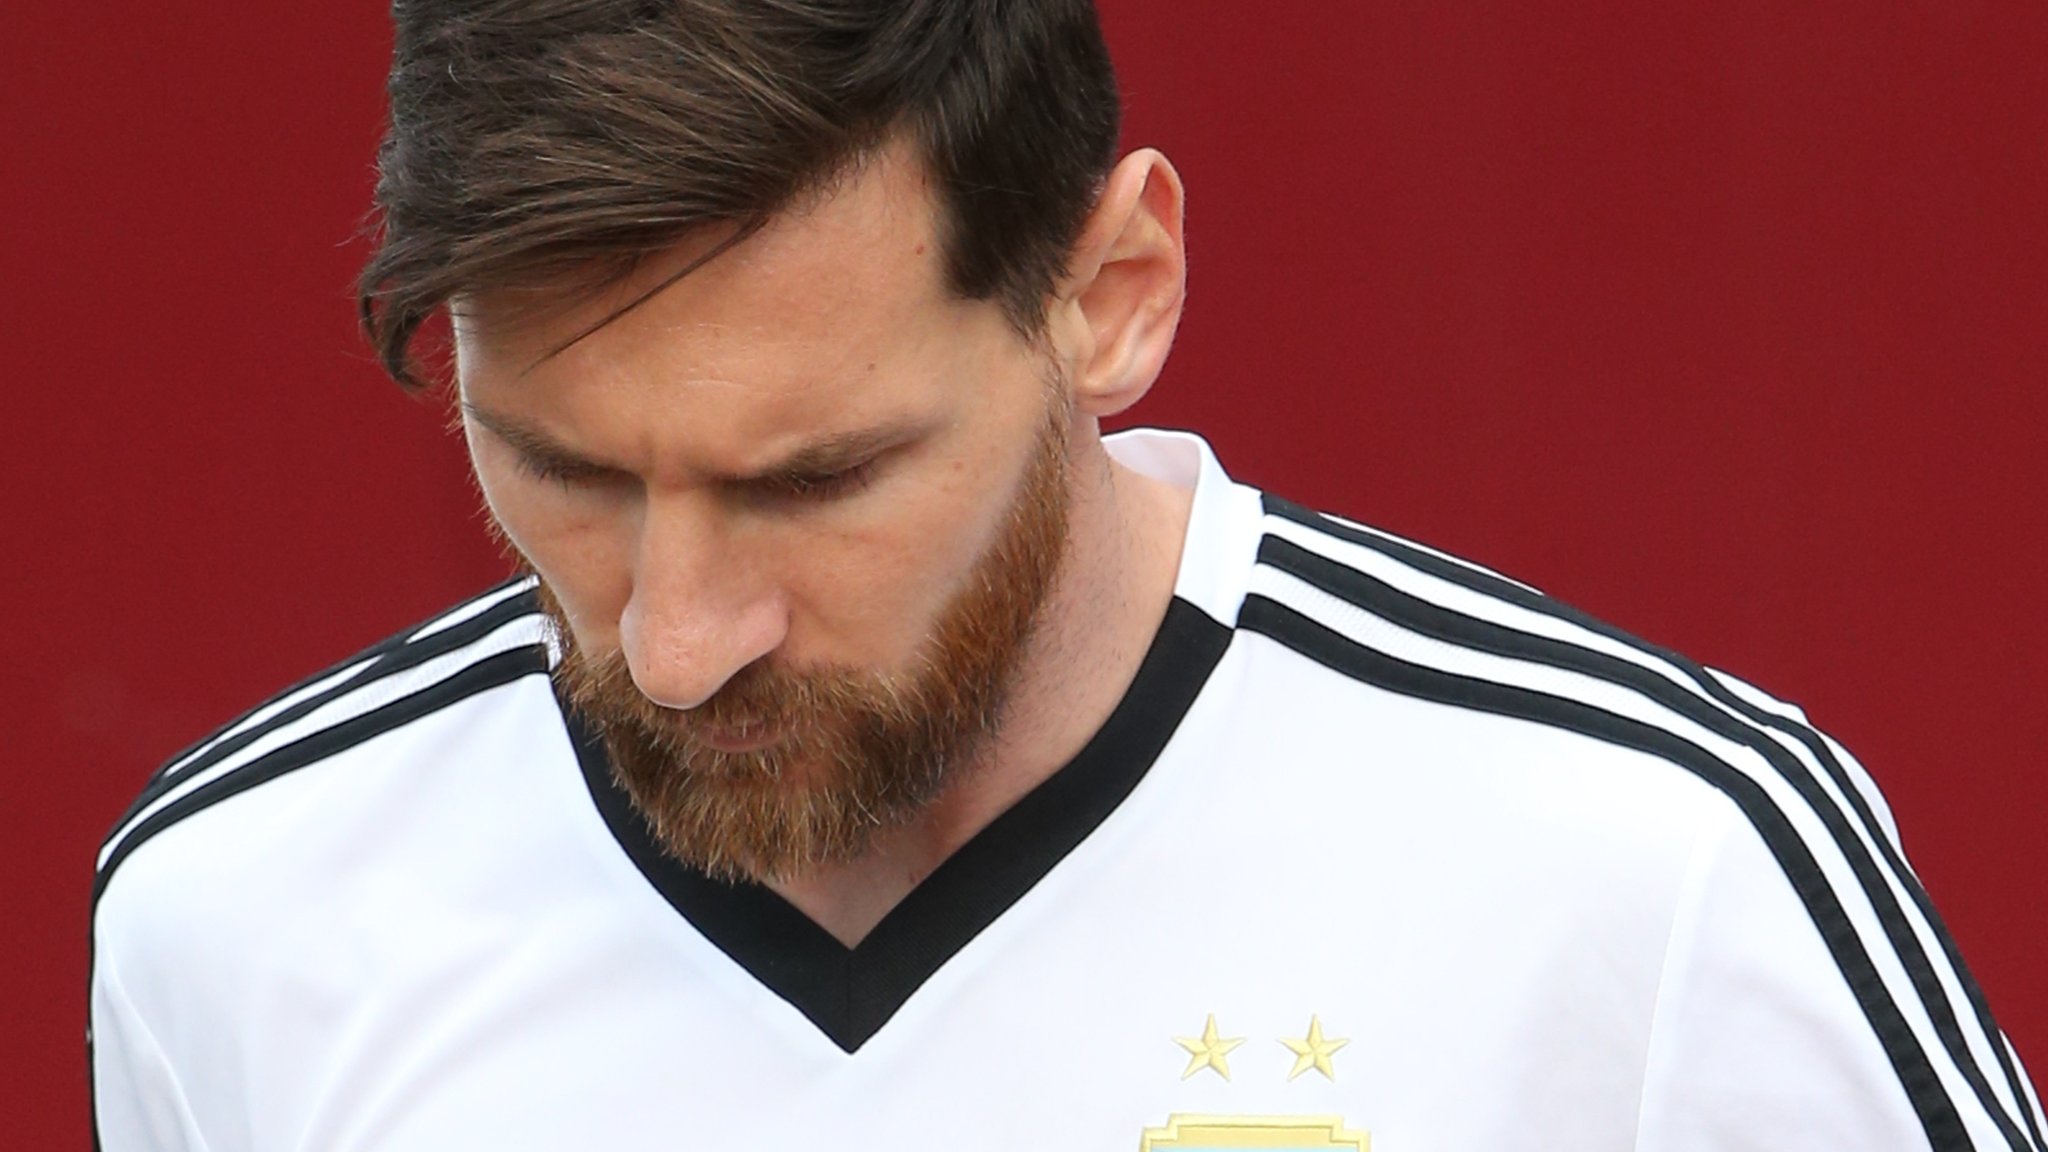 'Messi doesn't need to win World Cup to be all-time great'